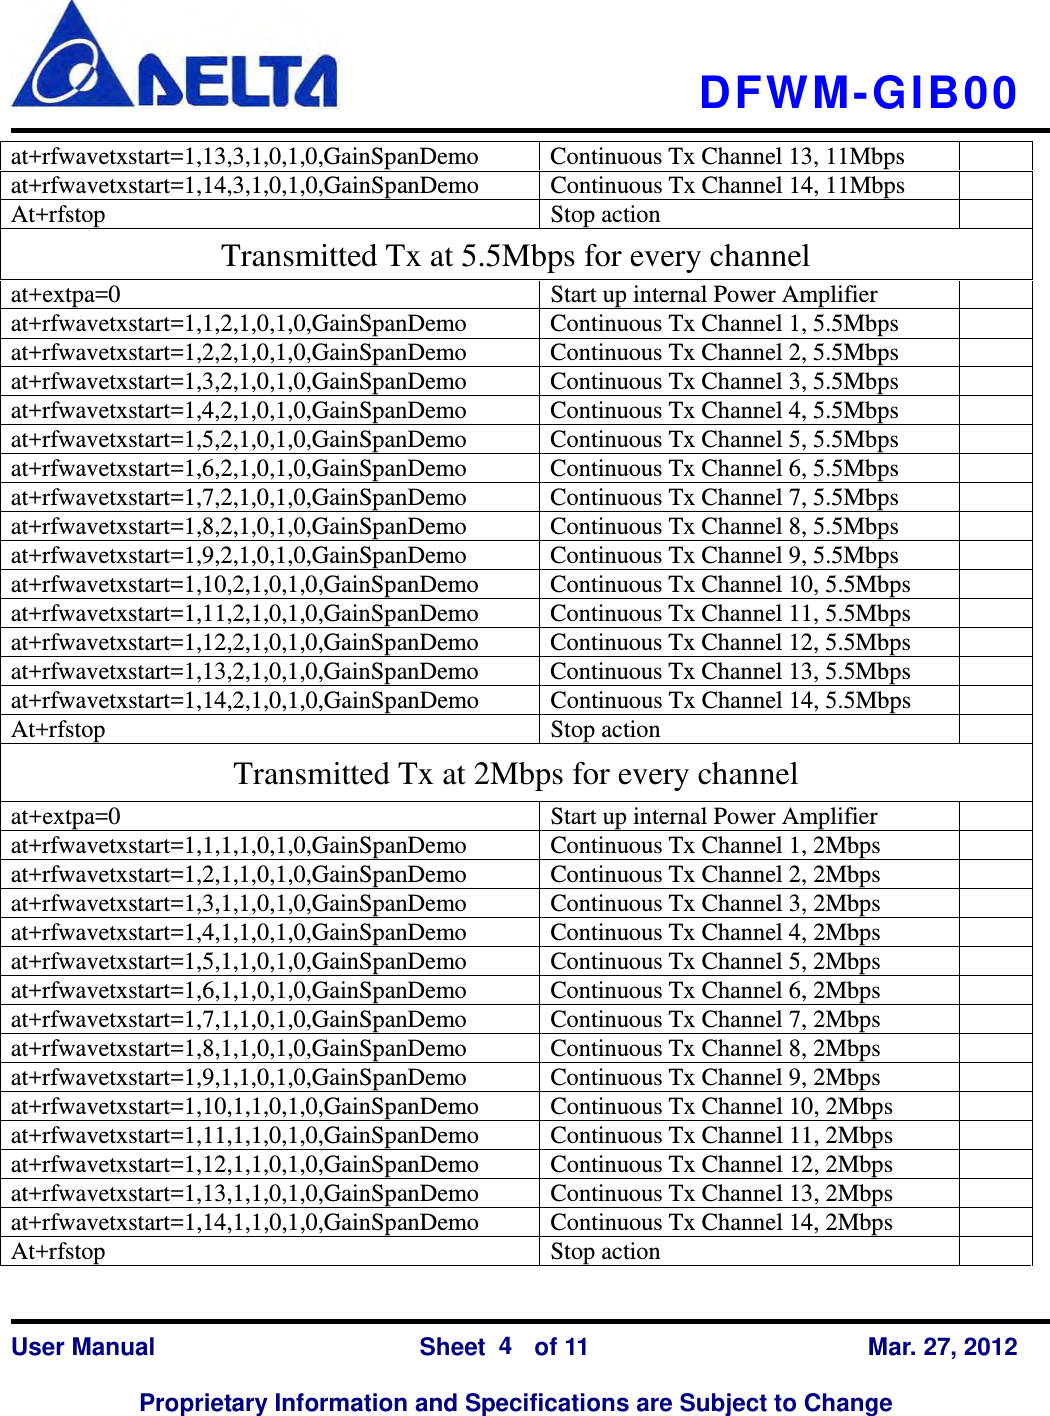   DFWM-GIB00    User Manual                Sheet    of 11      Mar. 27, 2012  Proprietary Information and Specifications are Subject to Change 4 at+rfwavetxstart=1,13,3,1,0,1,0,GainSpanDemo  Continuous Tx Channel 13, 11Mbps   at+rfwavetxstart=1,14,3,1,0,1,0,GainSpanDemo  Continuous Tx Channel 14, 11Mbps   At+rfstop Stop action  Transmitted Tx at 5.5Mbps for every channel at+extpa=0  Start up internal Power Amplifier   at+rfwavetxstart=1,1,2,1,0,1,0,GainSpanDemo  Continuous Tx Channel 1, 5.5Mbps   at+rfwavetxstart=1,2,2,1,0,1,0,GainSpanDemo  Continuous Tx Channel 2, 5.5Mbps   at+rfwavetxstart=1,3,2,1,0,1,0,GainSpanDemo  Continuous Tx Channel 3, 5.5Mbps   at+rfwavetxstart=1,4,2,1,0,1,0,GainSpanDemo  Continuous Tx Channel 4, 5.5Mbps   at+rfwavetxstart=1,5,2,1,0,1,0,GainSpanDemo  Continuous Tx Channel 5, 5.5Mbps   at+rfwavetxstart=1,6,2,1,0,1,0,GainSpanDemo  Continuous Tx Channel 6, 5.5Mbps   at+rfwavetxstart=1,7,2,1,0,1,0,GainSpanDemo  Continuous Tx Channel 7, 5.5Mbps   at+rfwavetxstart=1,8,2,1,0,1,0,GainSpanDemo  Continuous Tx Channel 8, 5.5Mbps   at+rfwavetxstart=1,9,2,1,0,1,0,GainSpanDemo  Continuous Tx Channel 9, 5.5Mbps   at+rfwavetxstart=1,10,2,1,0,1,0,GainSpanDemo  Continuous Tx Channel 10, 5.5Mbps   at+rfwavetxstart=1,11,2,1,0,1,0,GainSpanDemo  Continuous Tx Channel 11, 5.5Mbps   at+rfwavetxstart=1,12,2,1,0,1,0,GainSpanDemo  Continuous Tx Channel 12, 5.5Mbps   at+rfwavetxstart=1,13,2,1,0,1,0,GainSpanDemo  Continuous Tx Channel 13, 5.5Mbps   at+rfwavetxstart=1,14,2,1,0,1,0,GainSpanDemo  Continuous Tx Channel 14, 5.5Mbps   At+rfstop Stop action  Transmitted Tx at 2Mbps for every channel at+extpa=0  Start up internal Power Amplifier   at+rfwavetxstart=1,1,1,1,0,1,0,GainSpanDemo  Continuous Tx Channel 1, 2Mbps   at+rfwavetxstart=1,2,1,1,0,1,0,GainSpanDemo  Continuous Tx Channel 2, 2Mbps   at+rfwavetxstart=1,3,1,1,0,1,0,GainSpanDemo  Continuous Tx Channel 3, 2Mbps   at+rfwavetxstart=1,4,1,1,0,1,0,GainSpanDemo  Continuous Tx Channel 4, 2Mbps   at+rfwavetxstart=1,5,1,1,0,1,0,GainSpanDemo  Continuous Tx Channel 5, 2Mbps   at+rfwavetxstart=1,6,1,1,0,1,0,GainSpanDemo  Continuous Tx Channel 6, 2Mbps   at+rfwavetxstart=1,7,1,1,0,1,0,GainSpanDemo  Continuous Tx Channel 7, 2Mbps   at+rfwavetxstart=1,8,1,1,0,1,0,GainSpanDemo  Continuous Tx Channel 8, 2Mbps   at+rfwavetxstart=1,9,1,1,0,1,0,GainSpanDemo  Continuous Tx Channel 9, 2Mbps   at+rfwavetxstart=1,10,1,1,0,1,0,GainSpanDemo  Continuous Tx Channel 10, 2Mbps   at+rfwavetxstart=1,11,1,1,0,1,0,GainSpanDemo  Continuous Tx Channel 11, 2Mbps   at+rfwavetxstart=1,12,1,1,0,1,0,GainSpanDemo  Continuous Tx Channel 12, 2Mbps   at+rfwavetxstart=1,13,1,1,0,1,0,GainSpanDemo  Continuous Tx Channel 13, 2Mbps   at+rfwavetxstart=1,14,1,1,0,1,0,GainSpanDemo  Continuous Tx Channel 14, 2Mbps   At+rfstop Stop action  